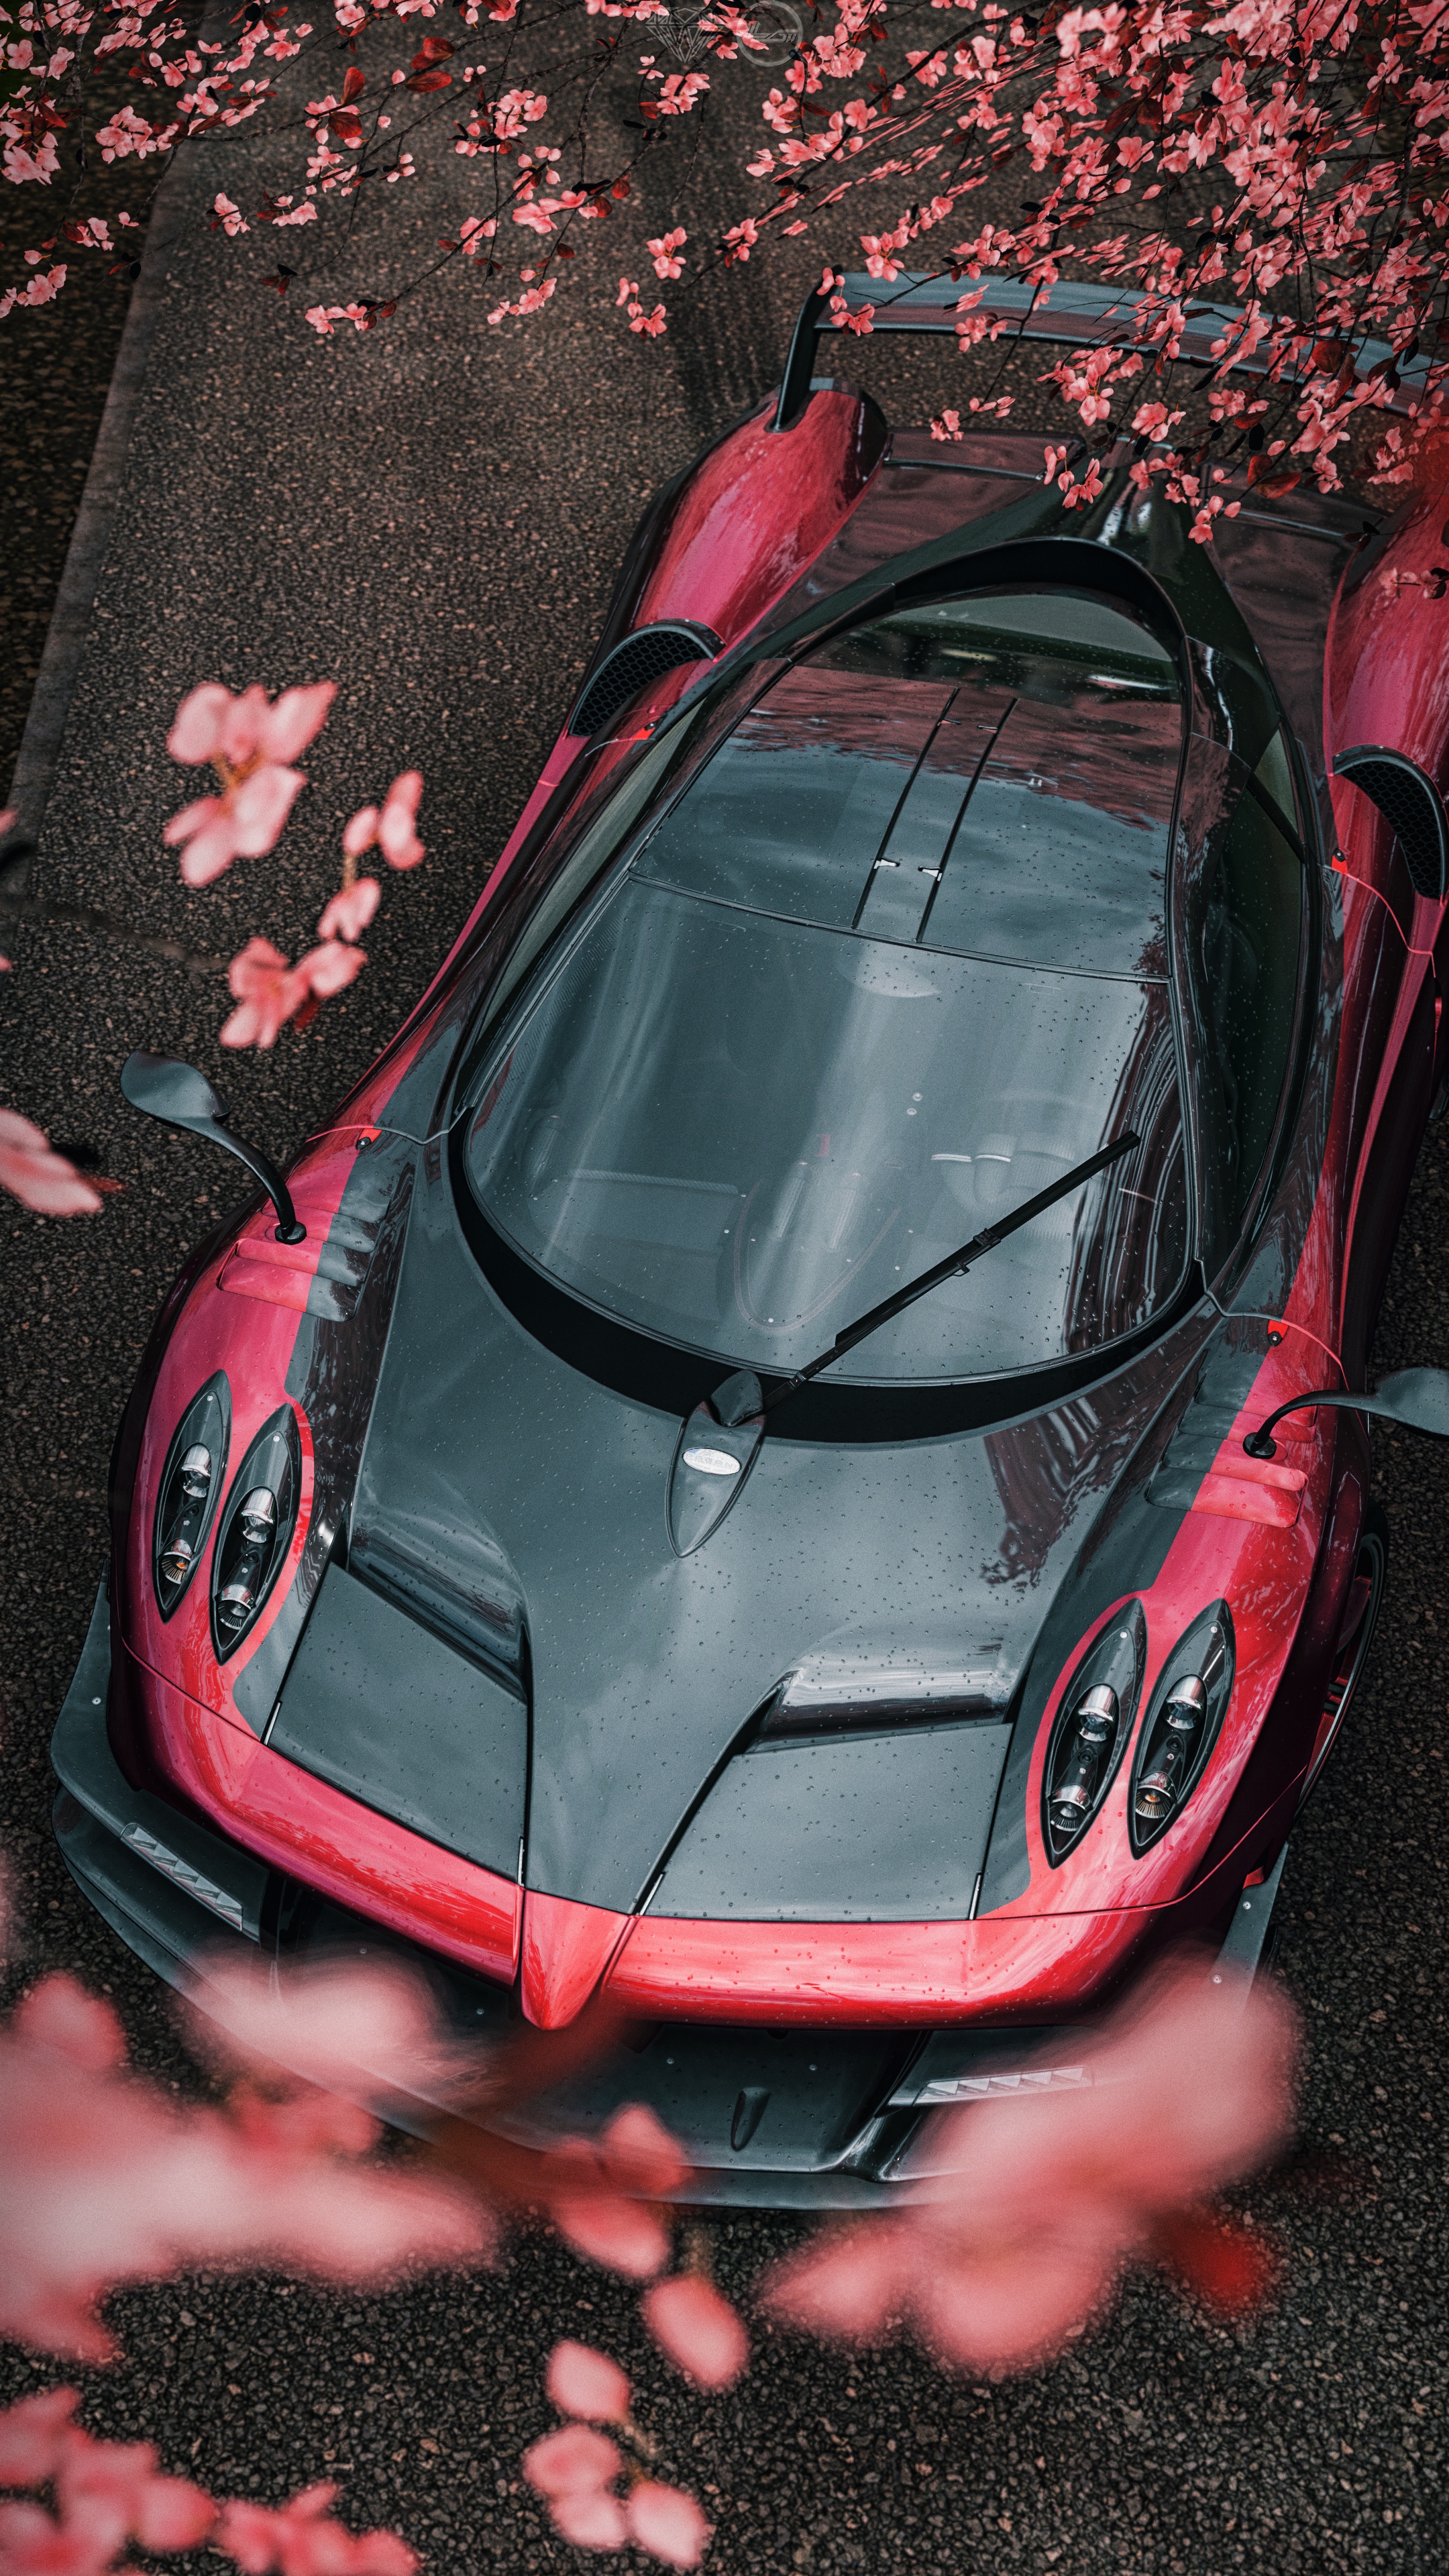 sports car, sports, flowers, cars, view from above, car, machine